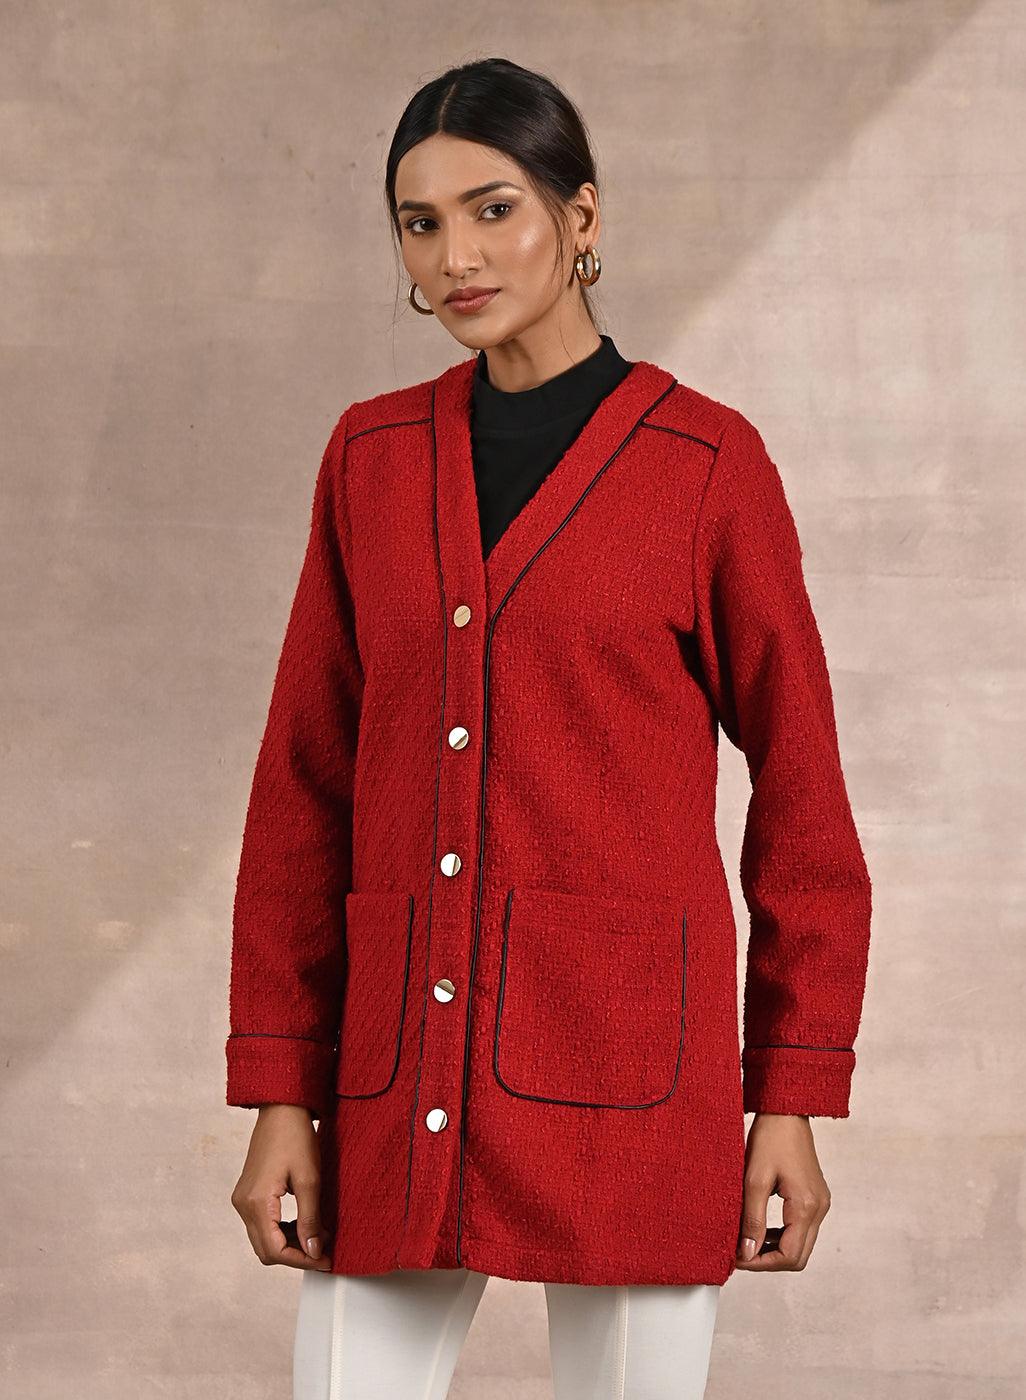 Red Long Sleeve Textured Jacket with Metallic Buttons - Lakshita